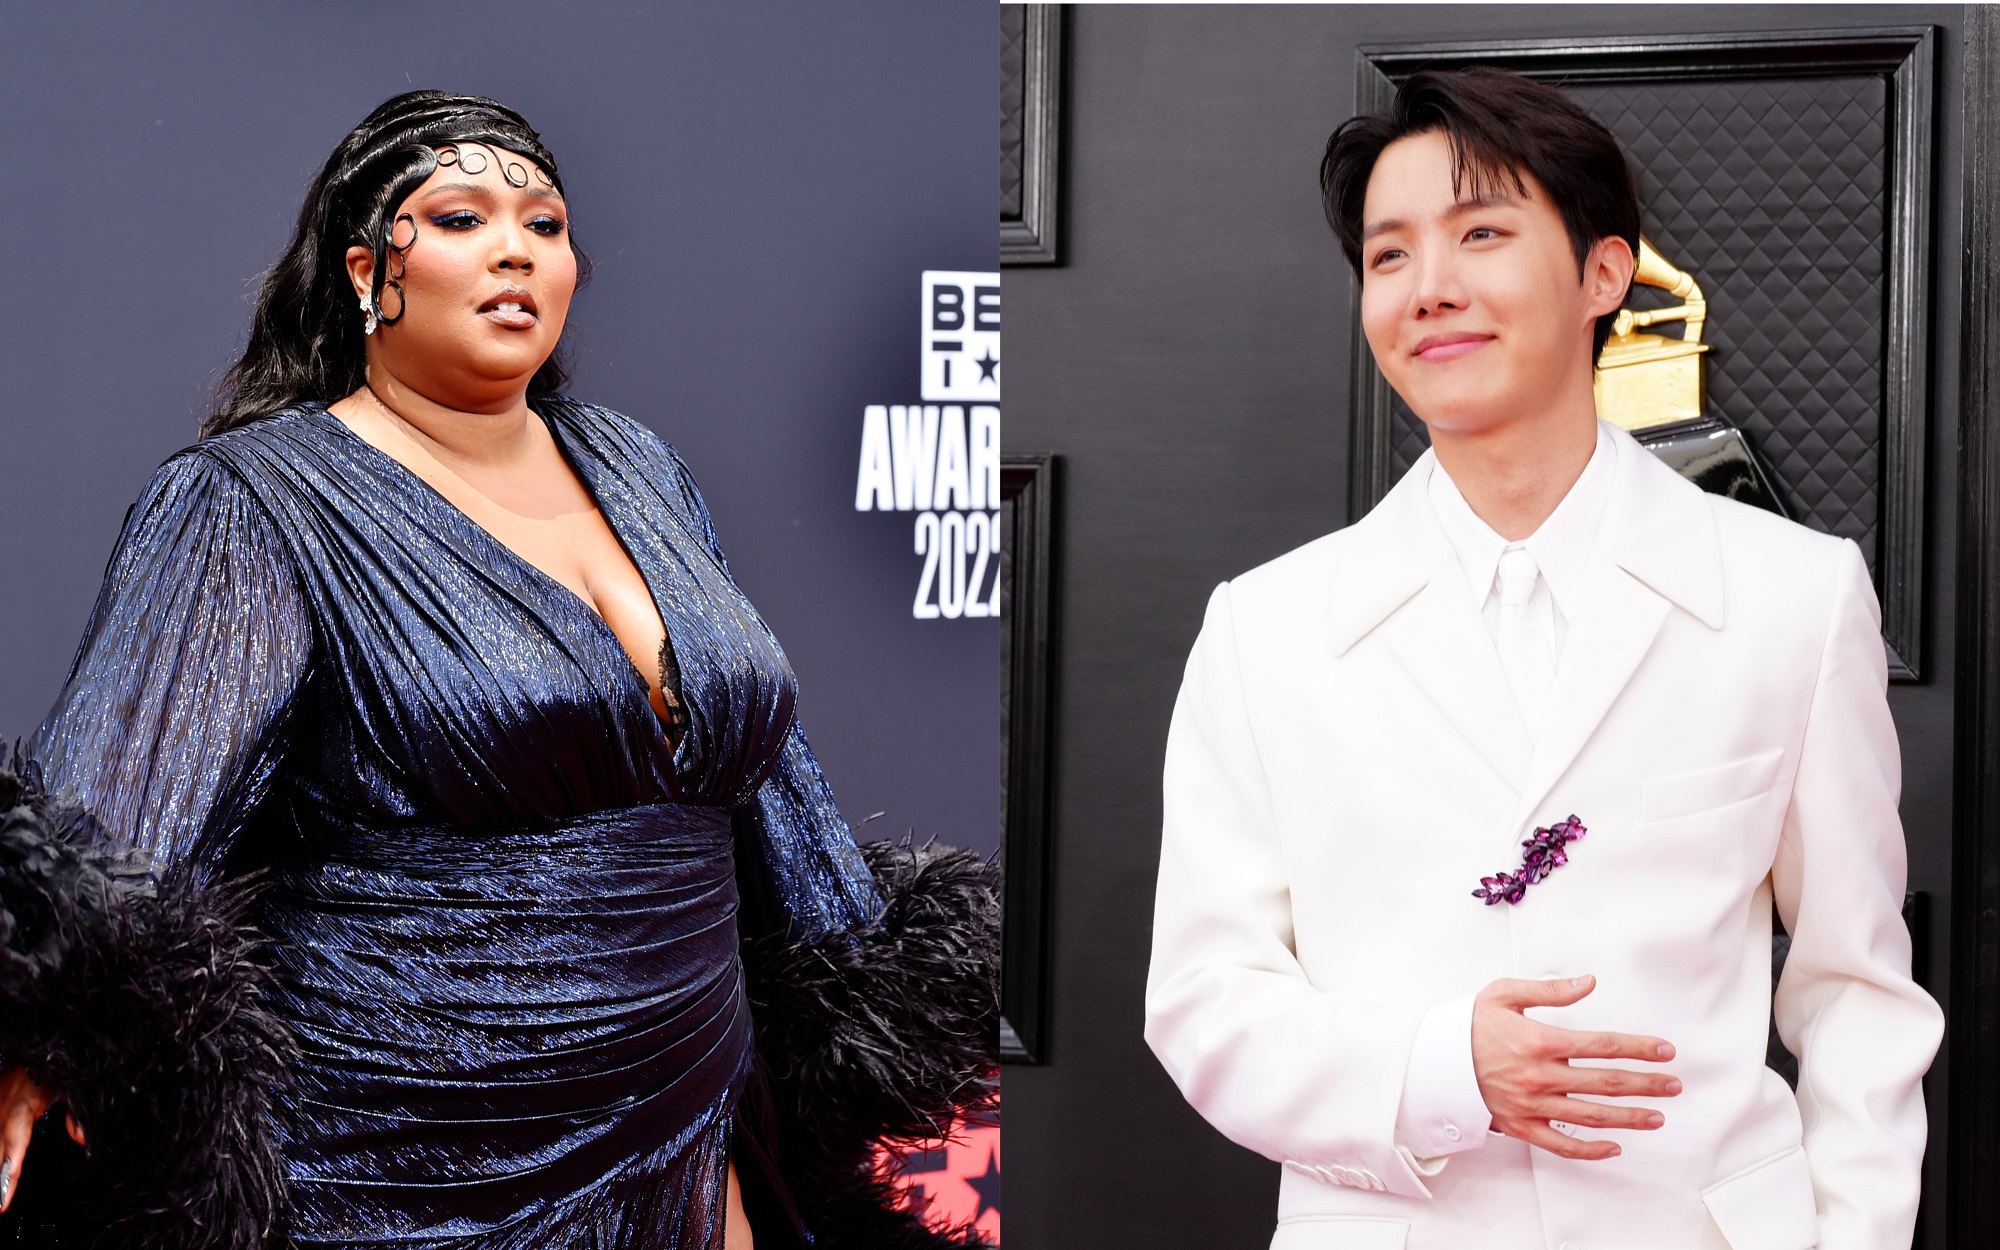 A joined photo of Lizzo and J-Hope of BTS